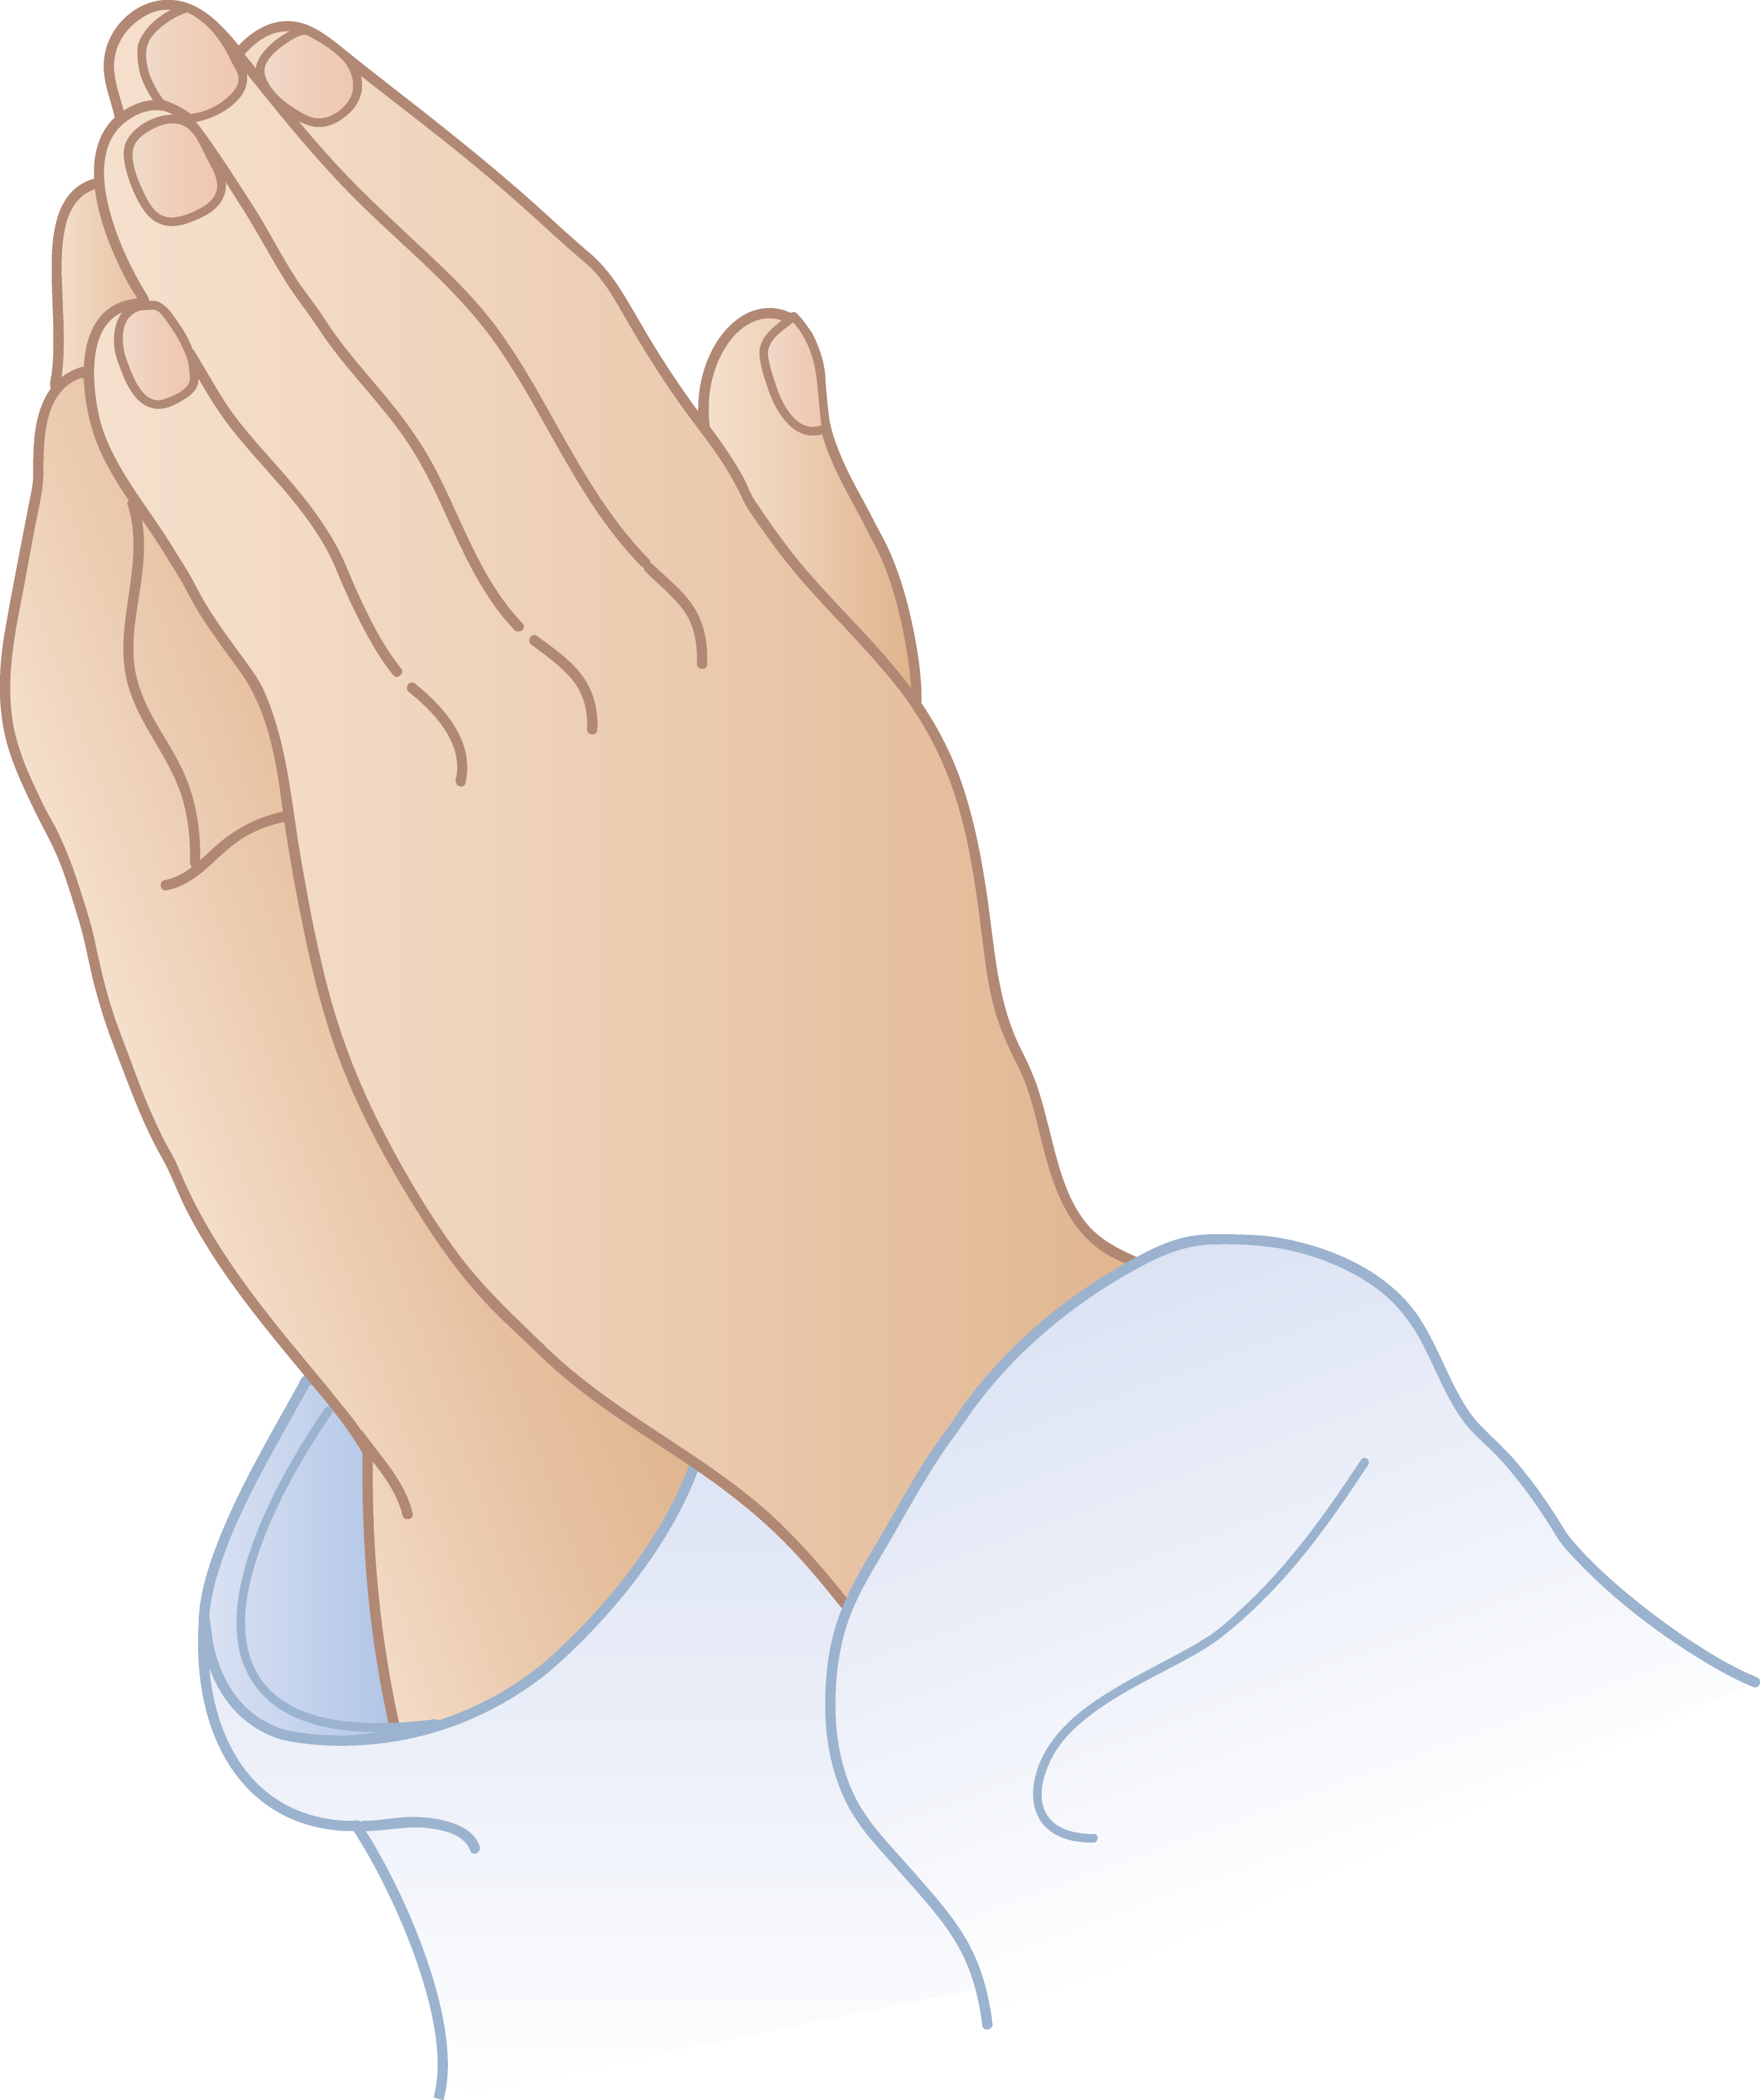 free clipart of jesus' hands - photo #32